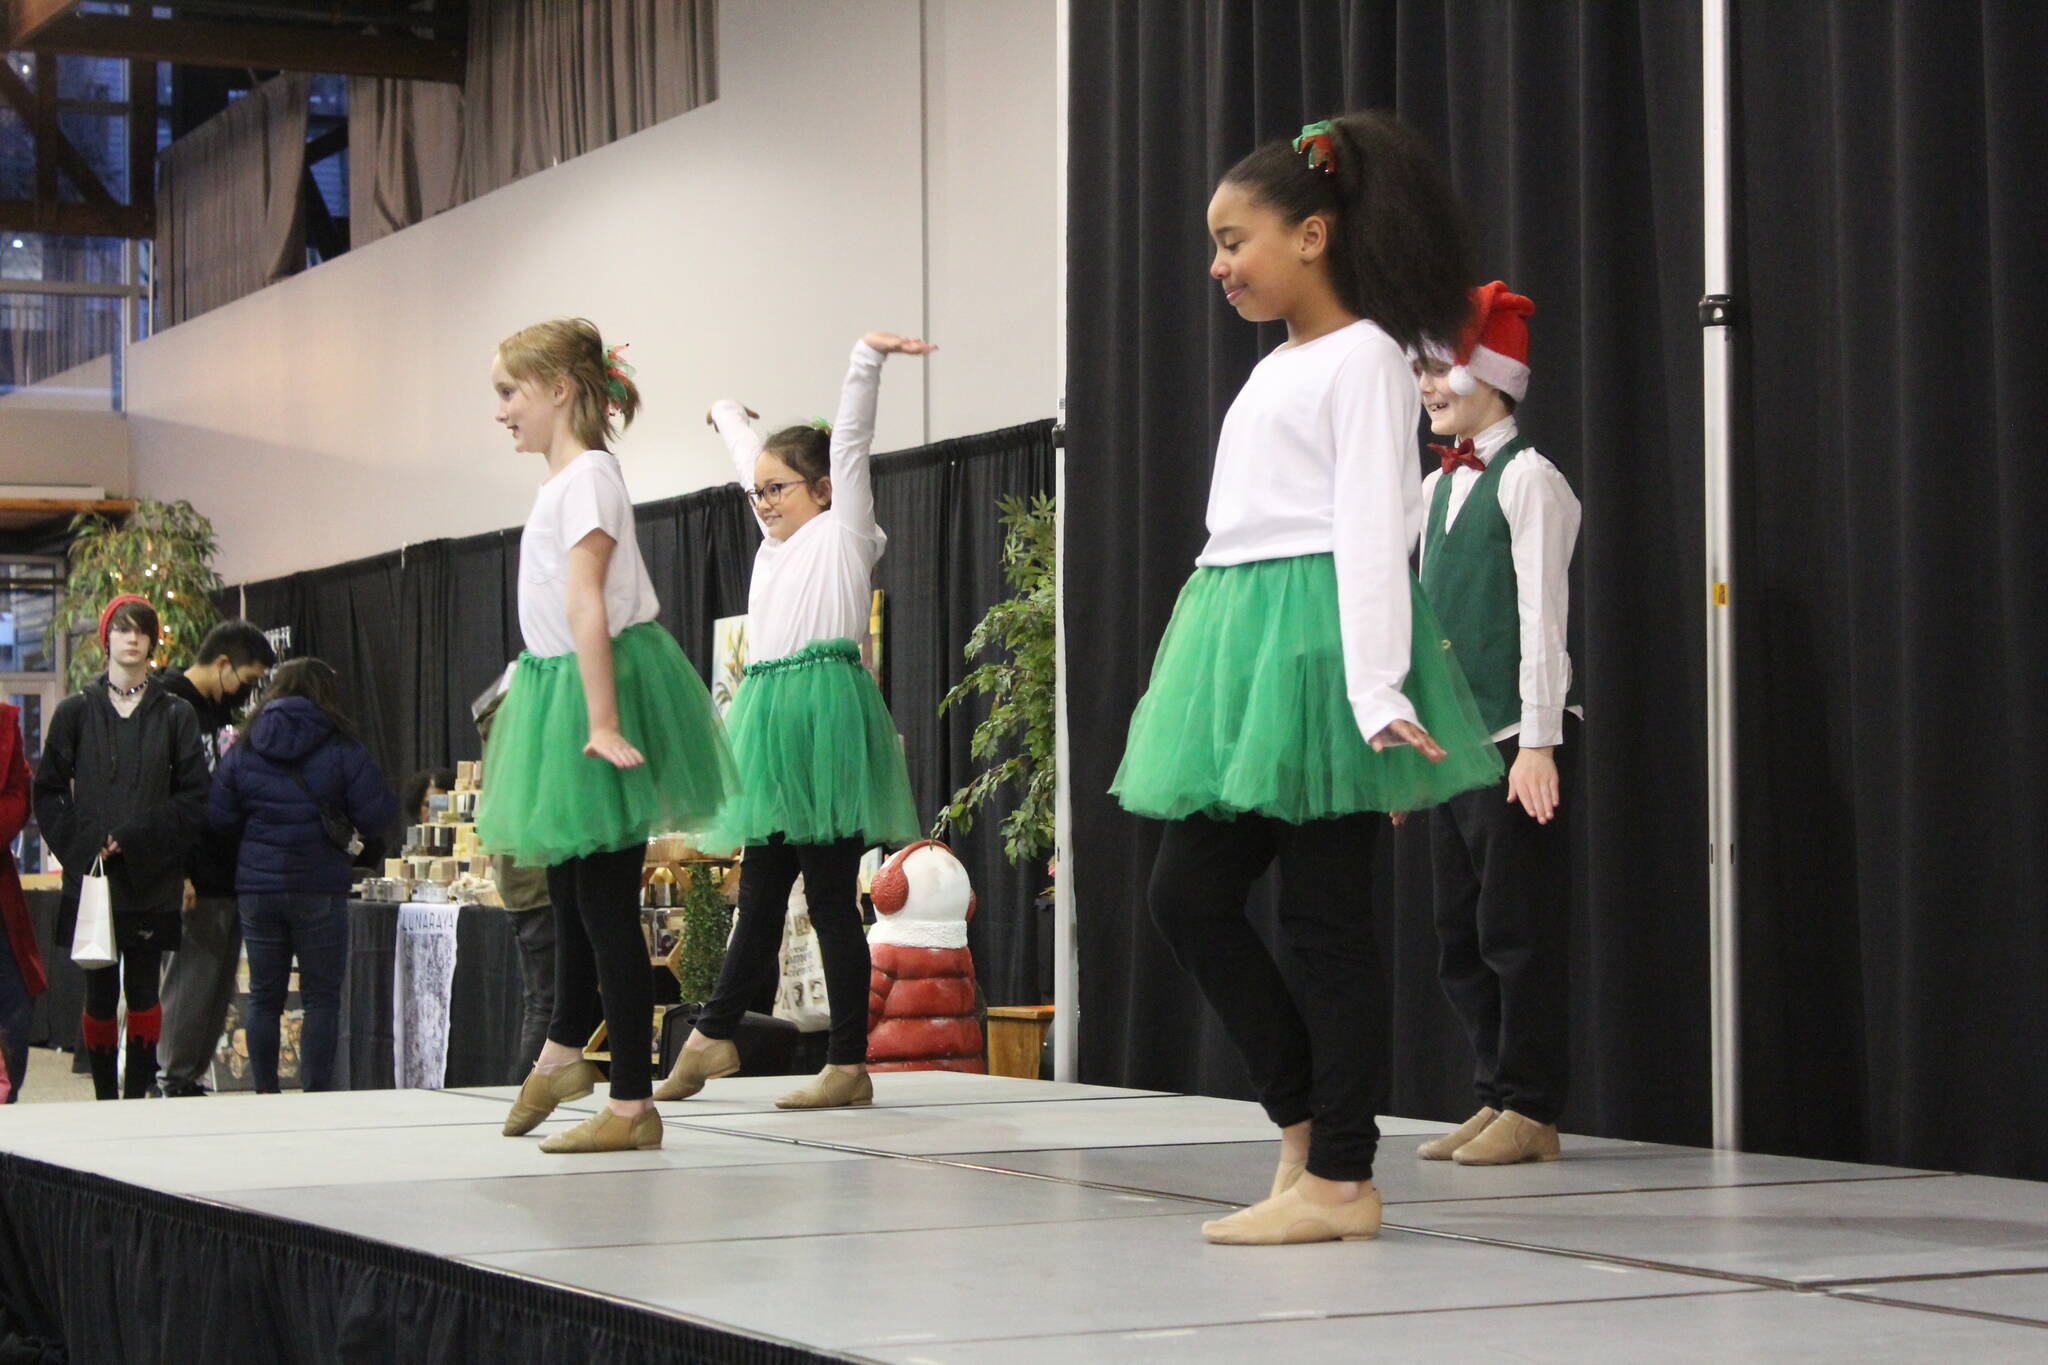 Photo by Bailey Jo Josie/Sound Publishing.
To kick off the holiday festivities, young dance students showed off their skills with yuletide attire and Christmas music.